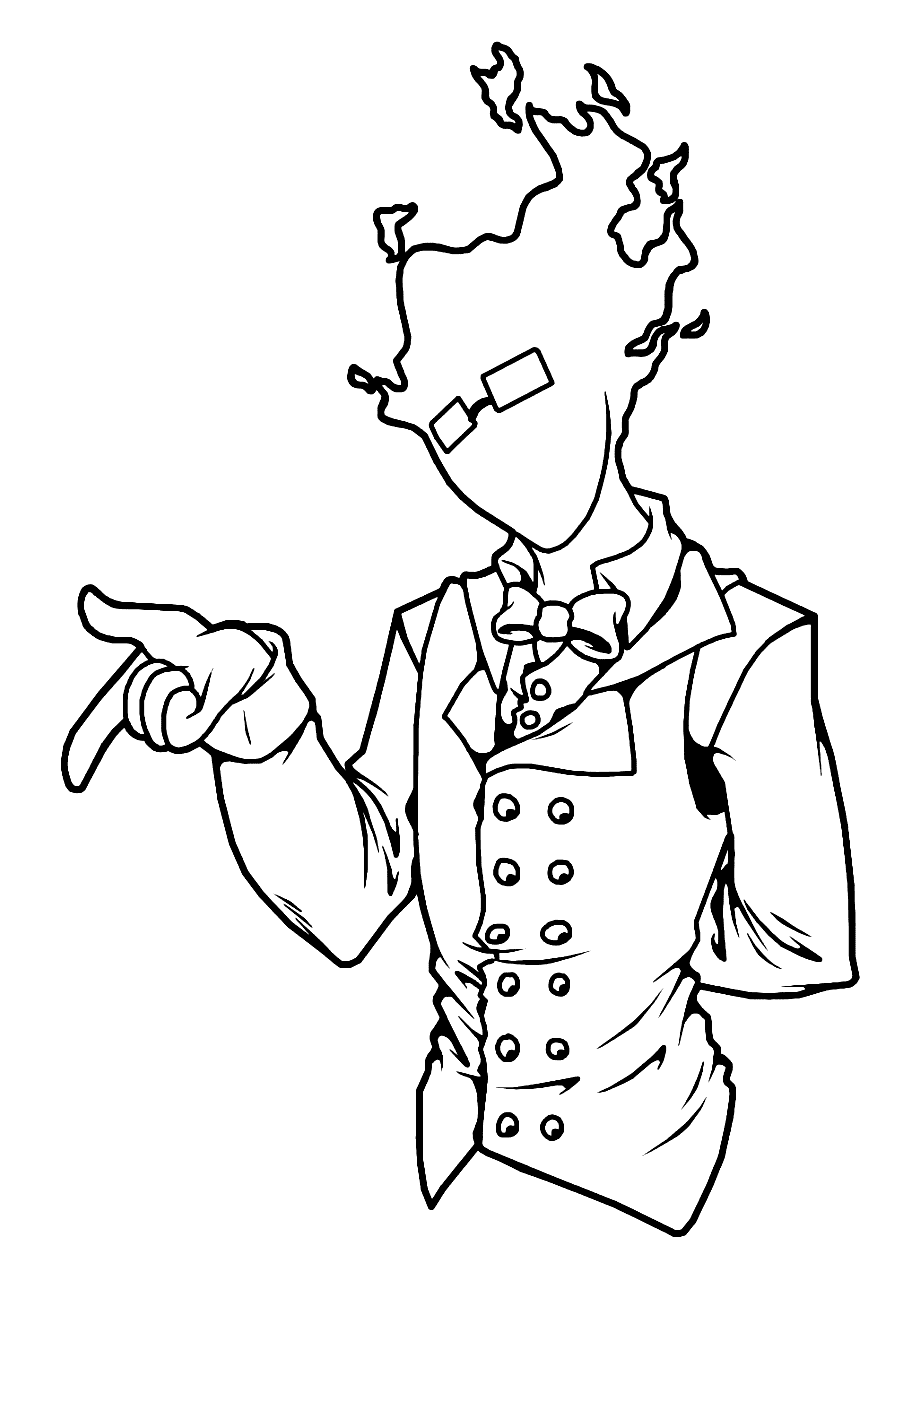 Grillby from Undertale Coloring Page